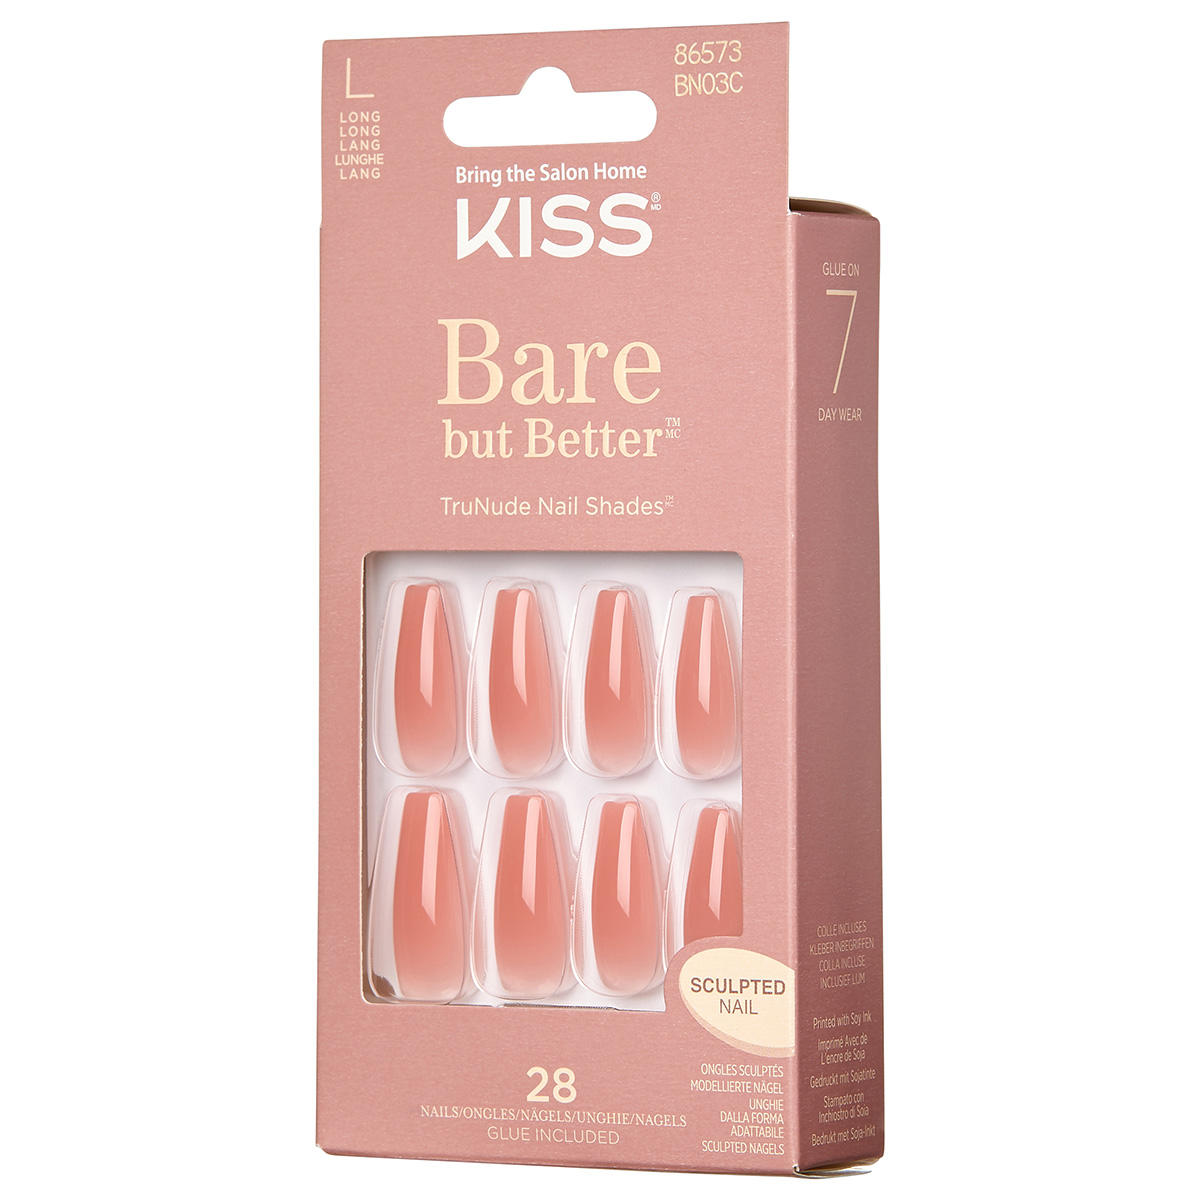 KISS Bare but Better Nails - Nude Glow  - 5